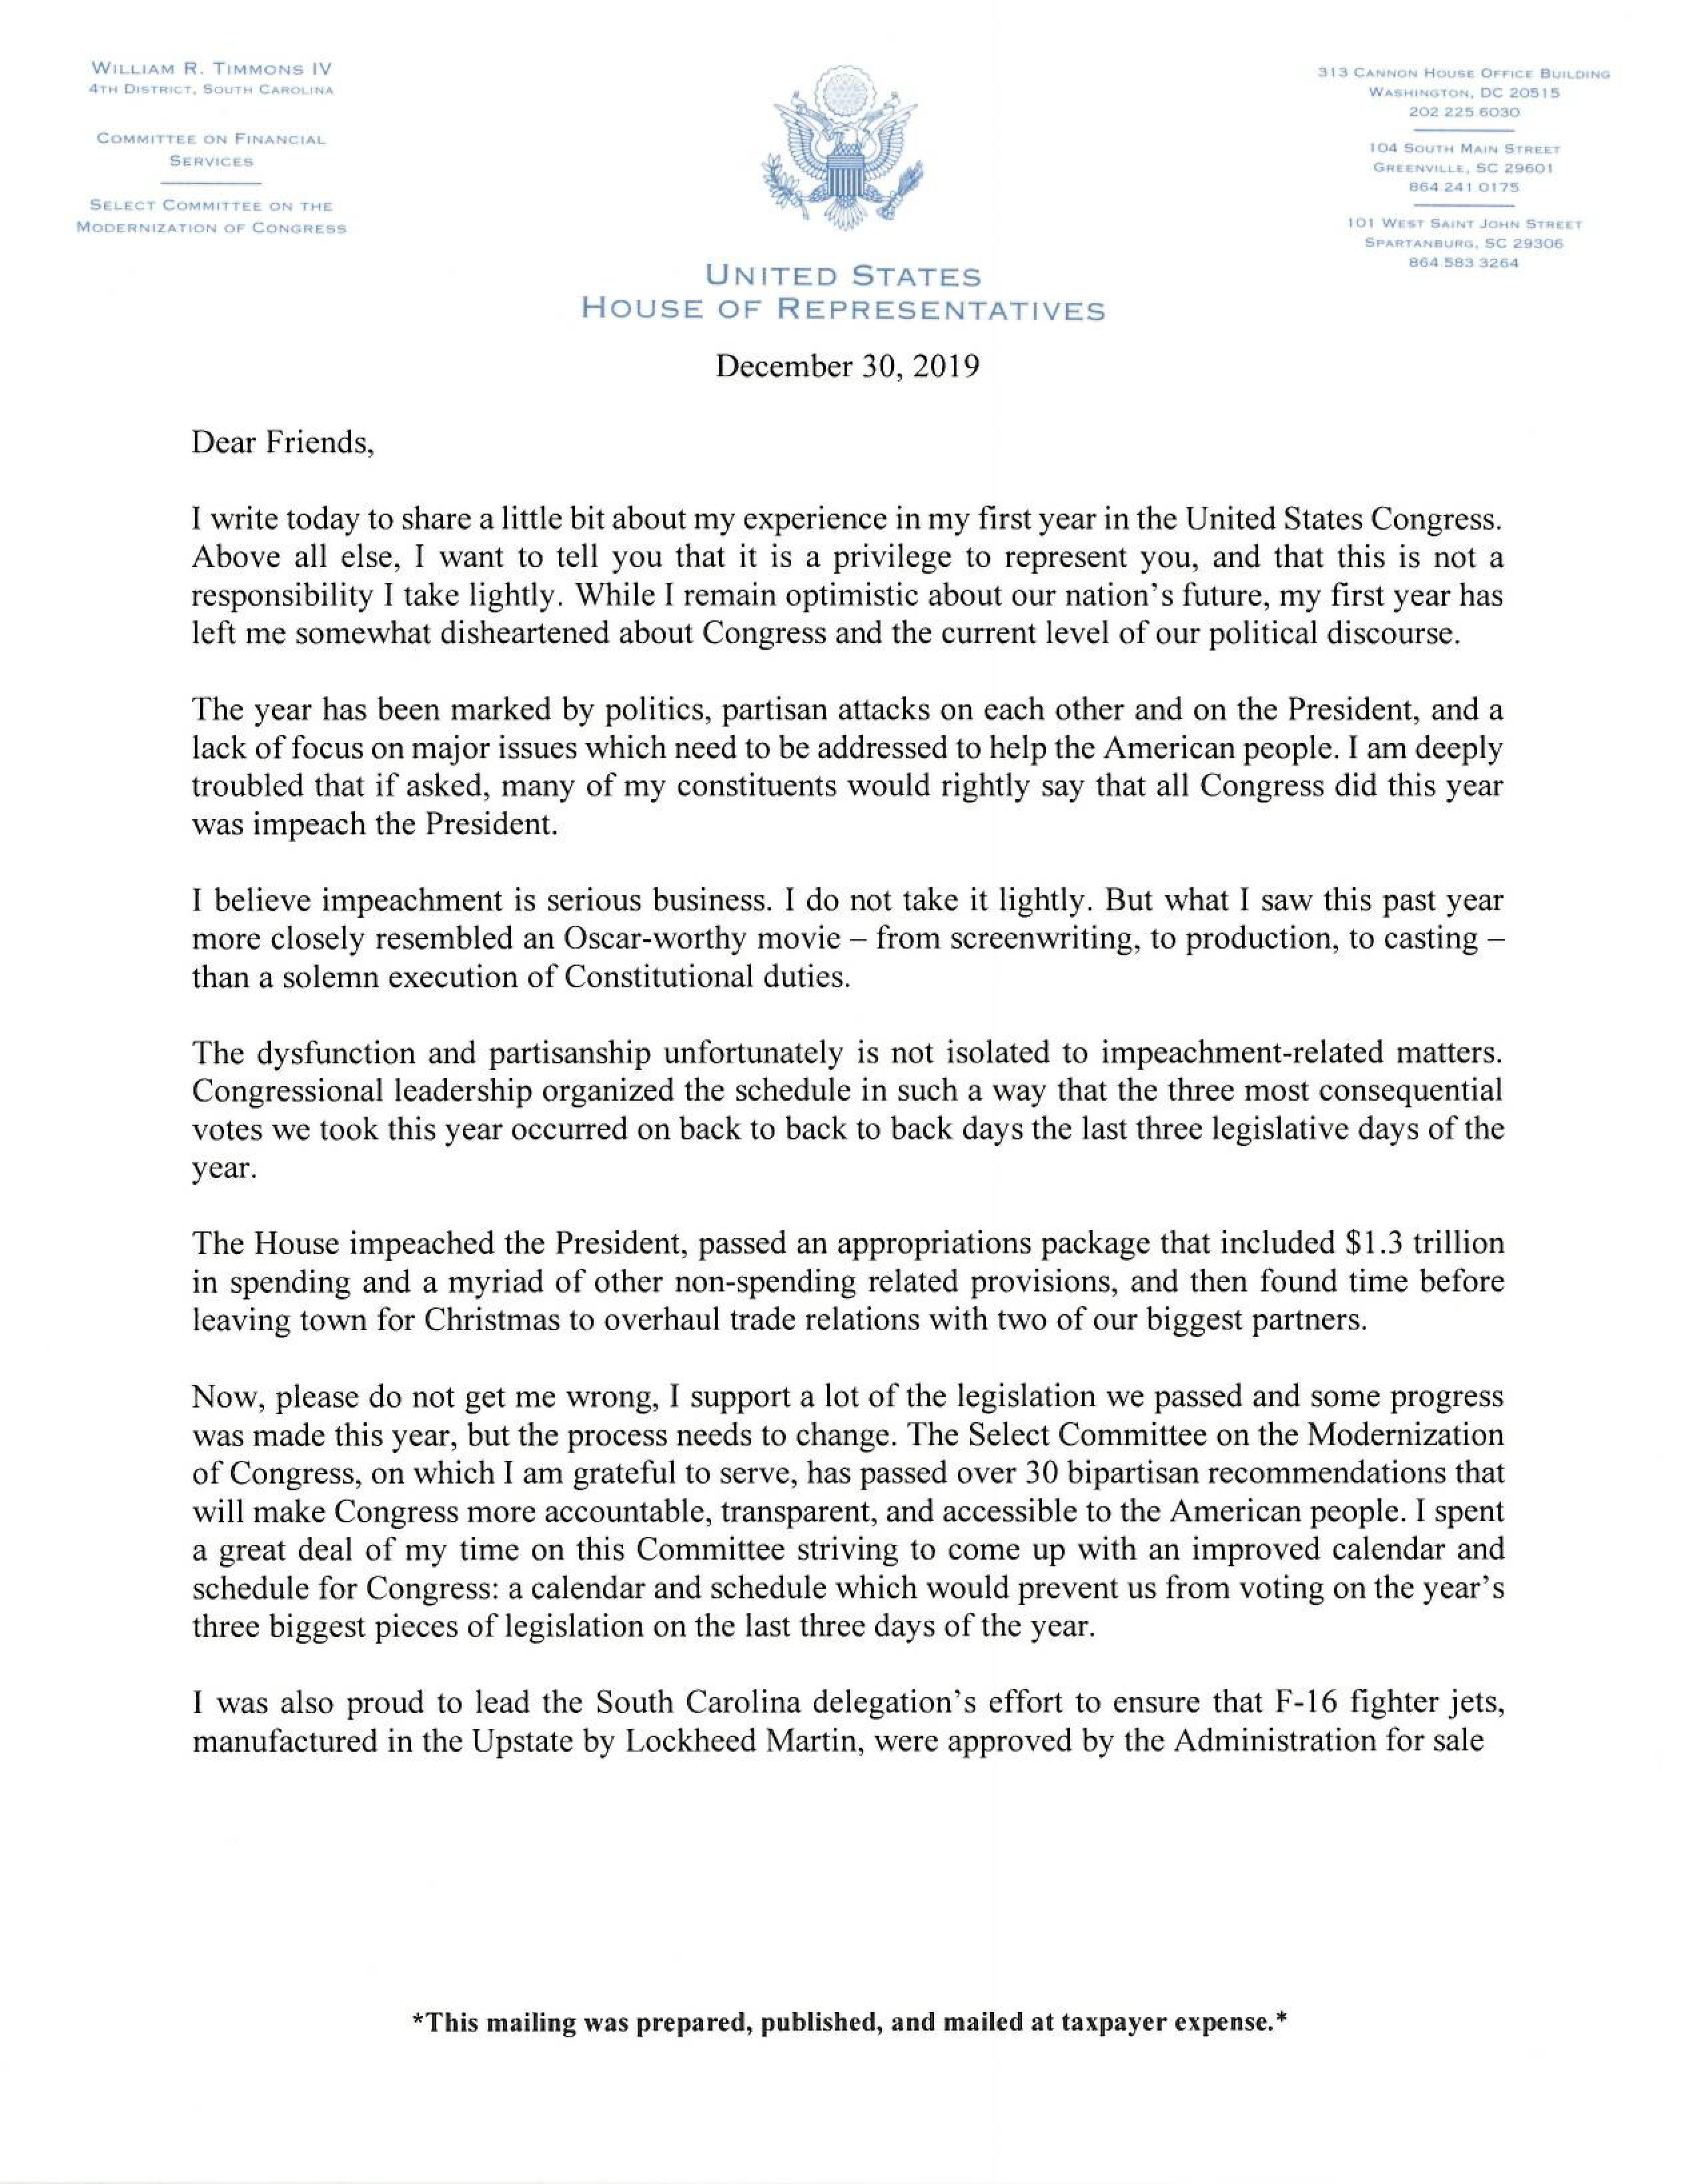 Timmons Writes to Constituents Reflecting on First Year in